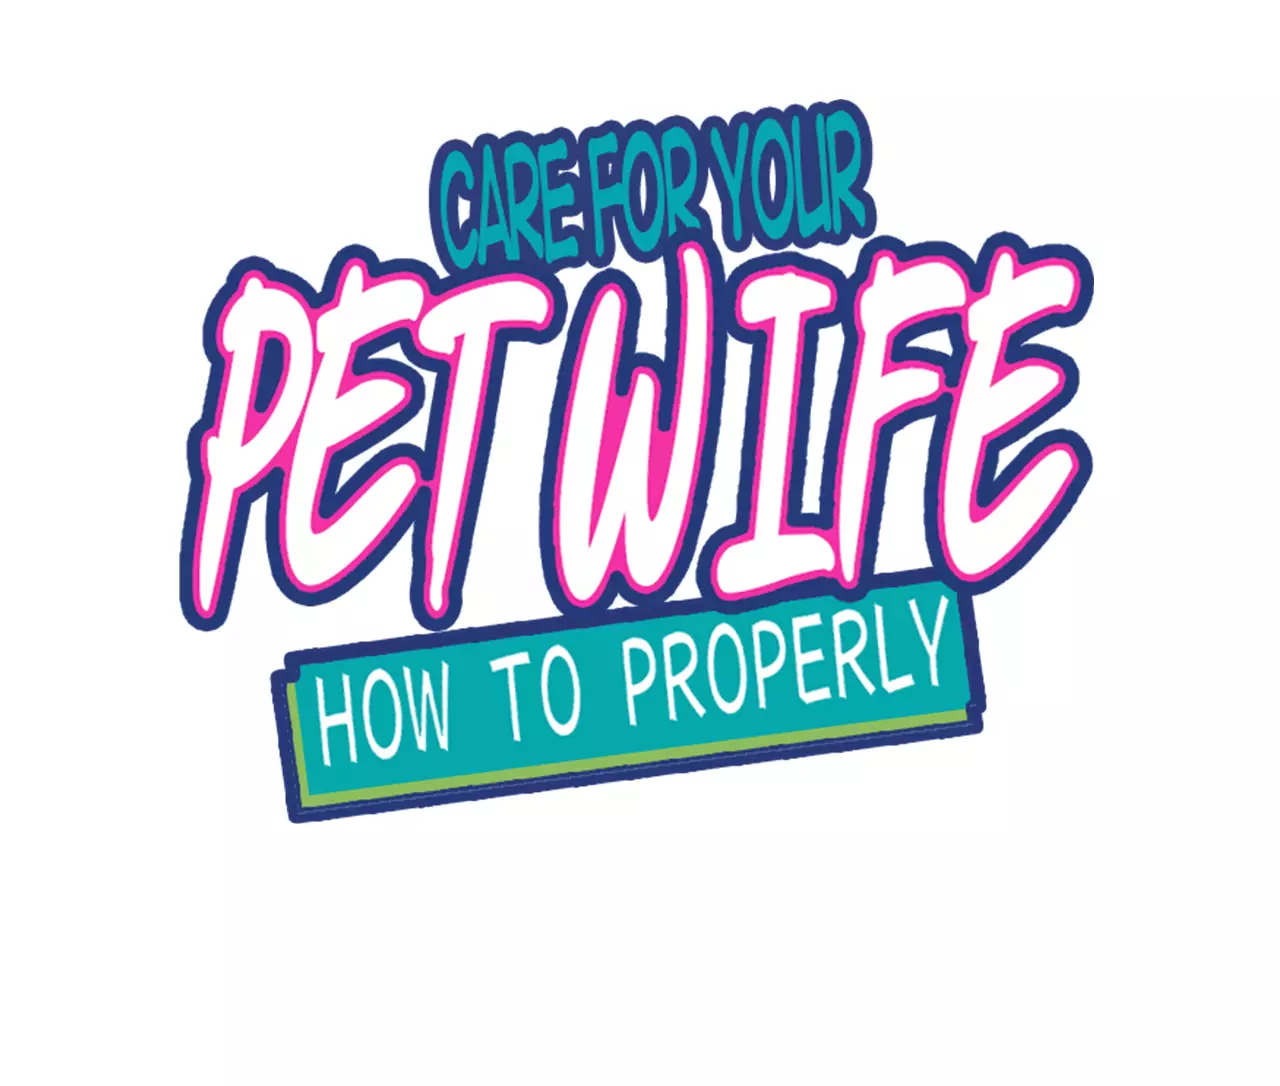 How To Properly Care For Your Pet Wife - 20.1 page 1